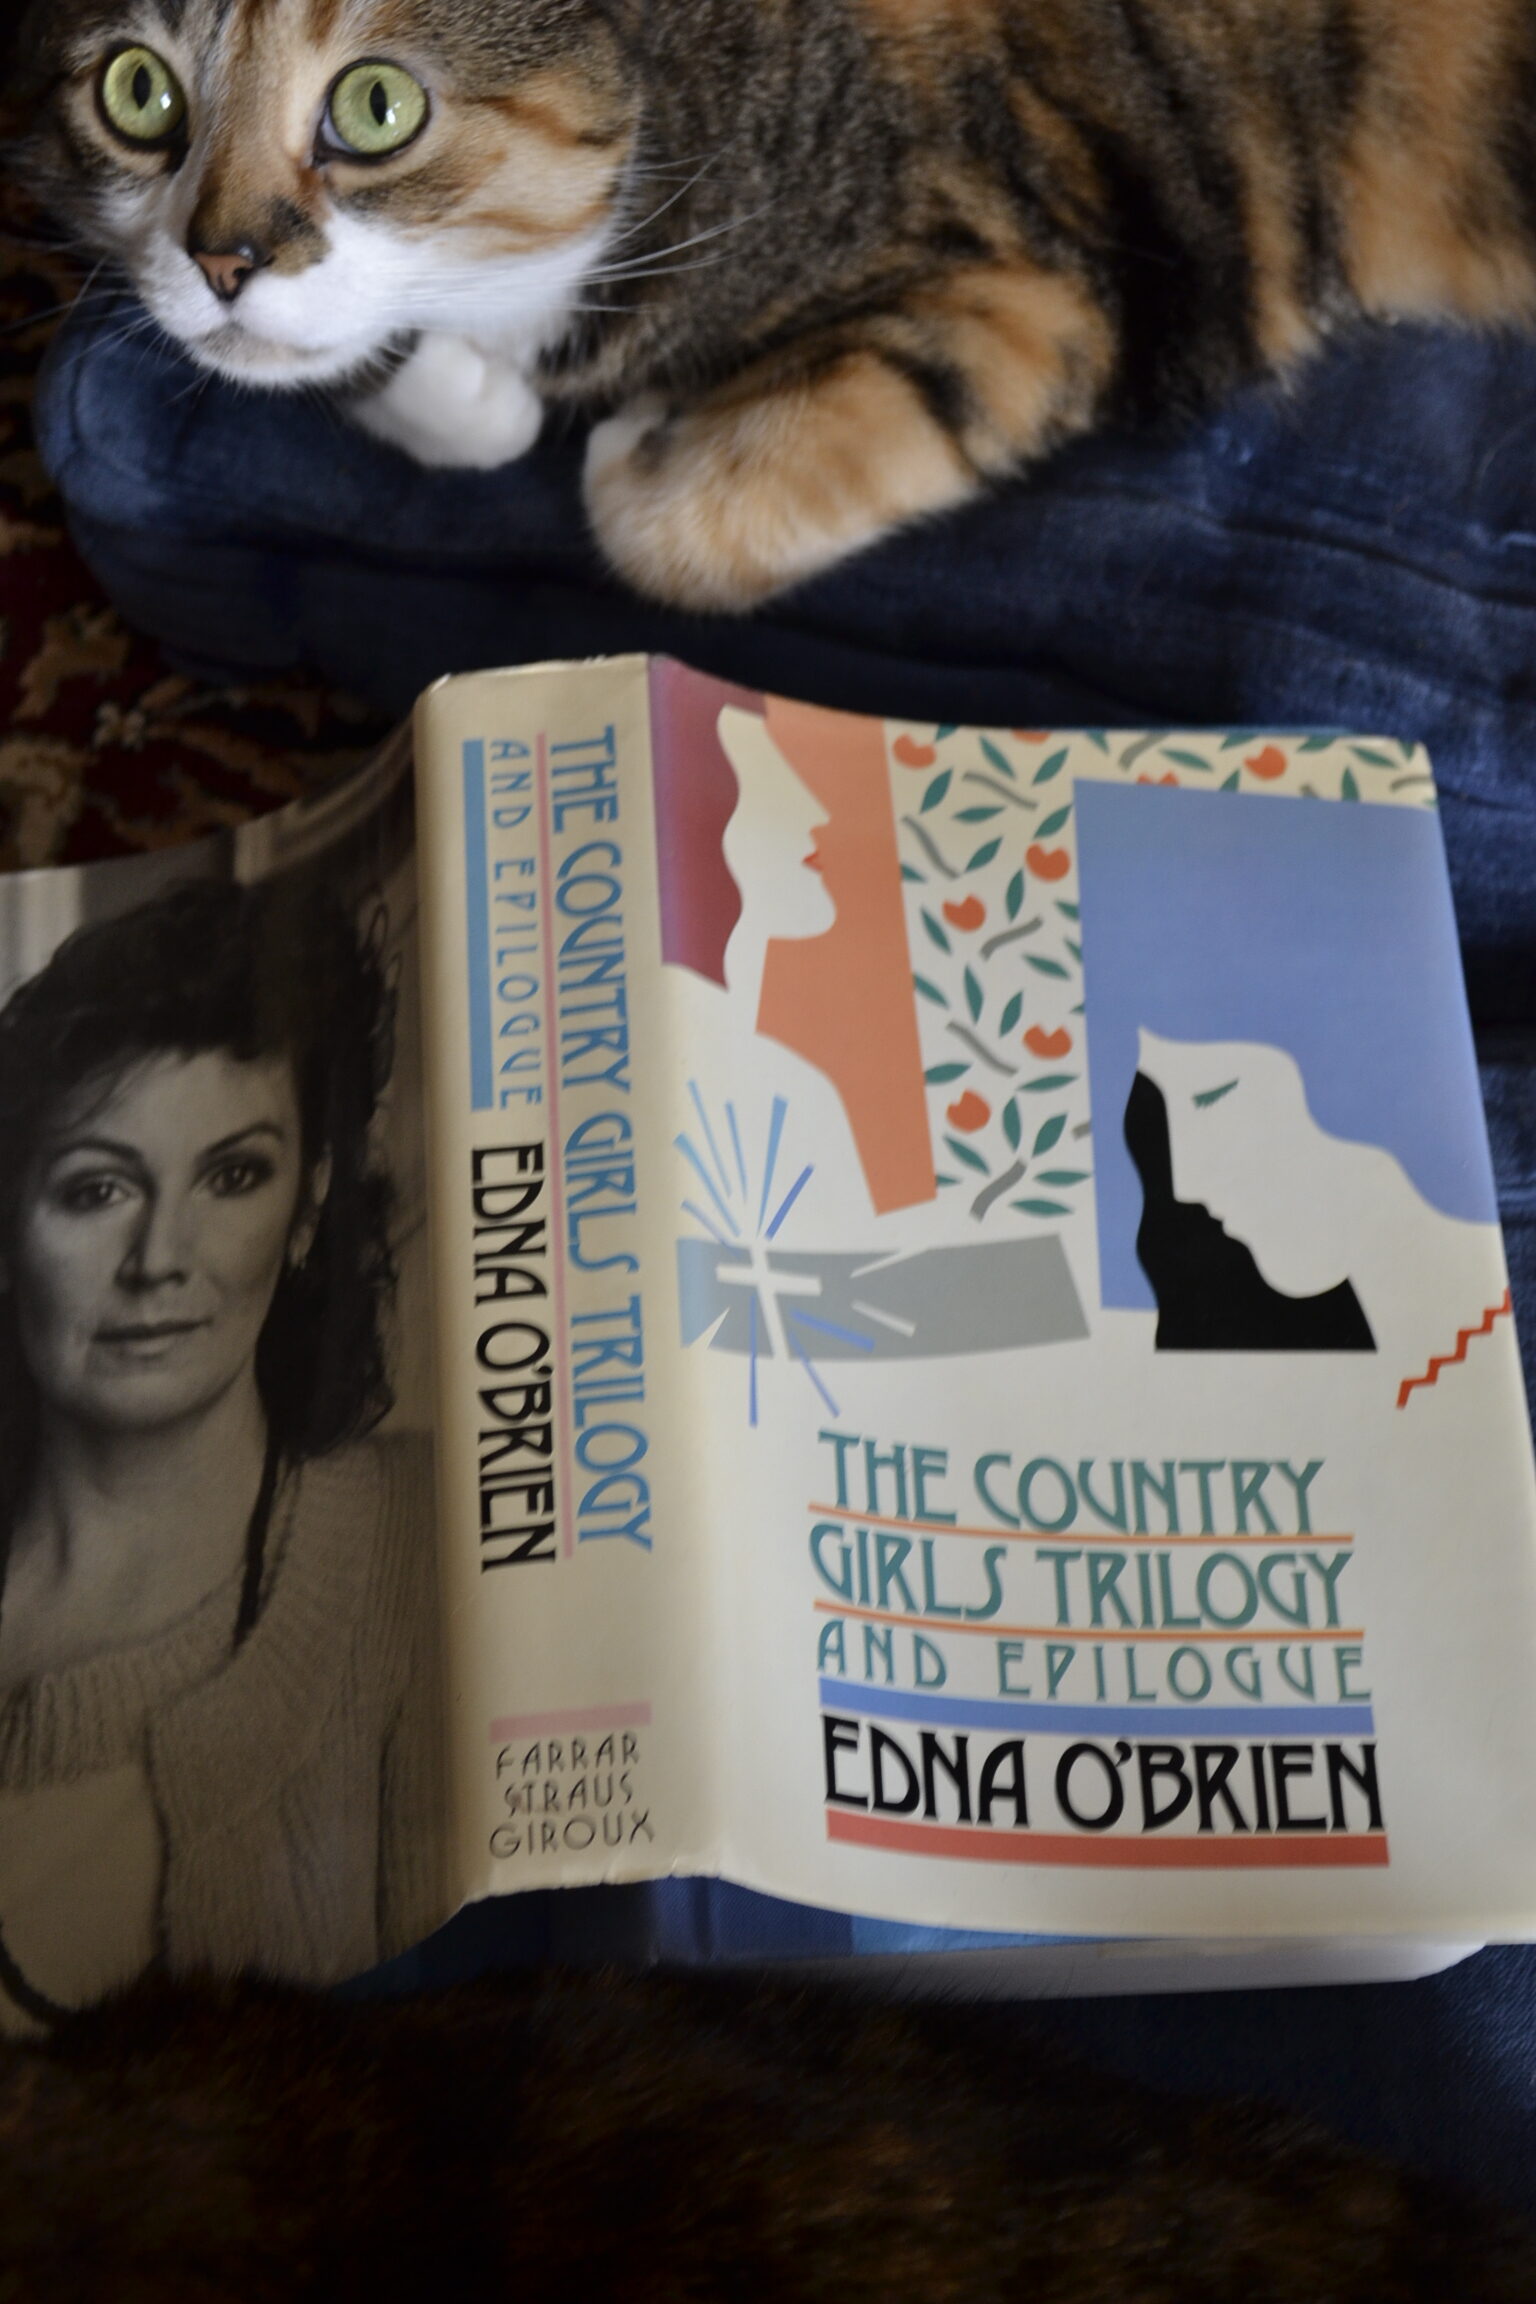 A wide-eyed calico tabby sits beside an open book titled 'The Country Girls Trilogy and Epilogue'.